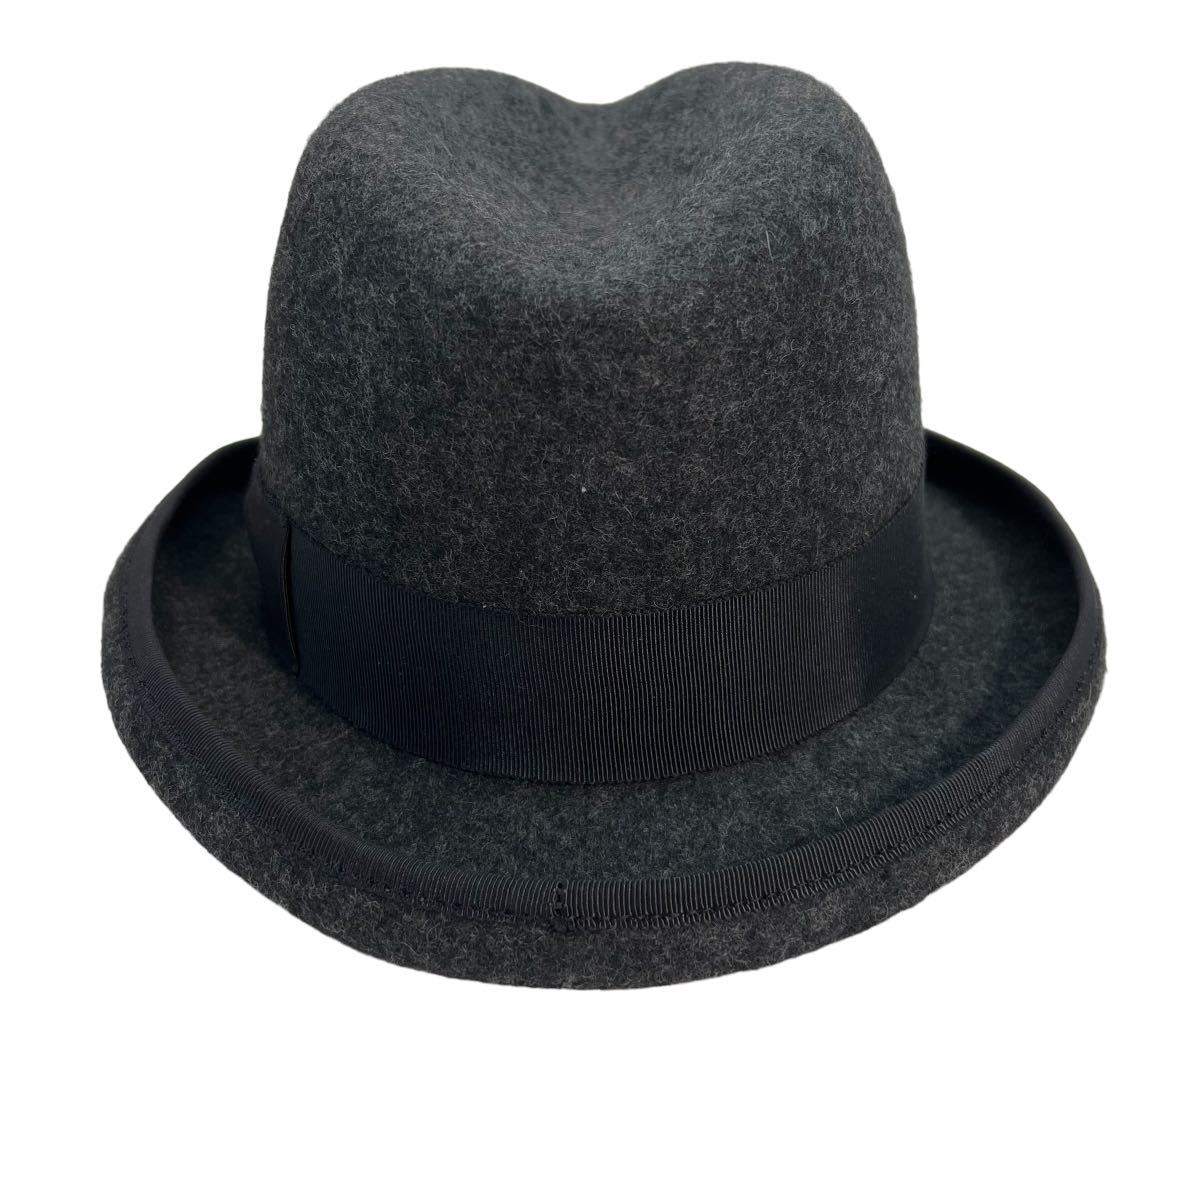  regular price 2.2 ten thousand new goods GANGSTERVILLE gang Star Bill wool felt hat size M(58.0cm rom and rear (before and after) ) gray unused goods tag attaching made in Japan A2161